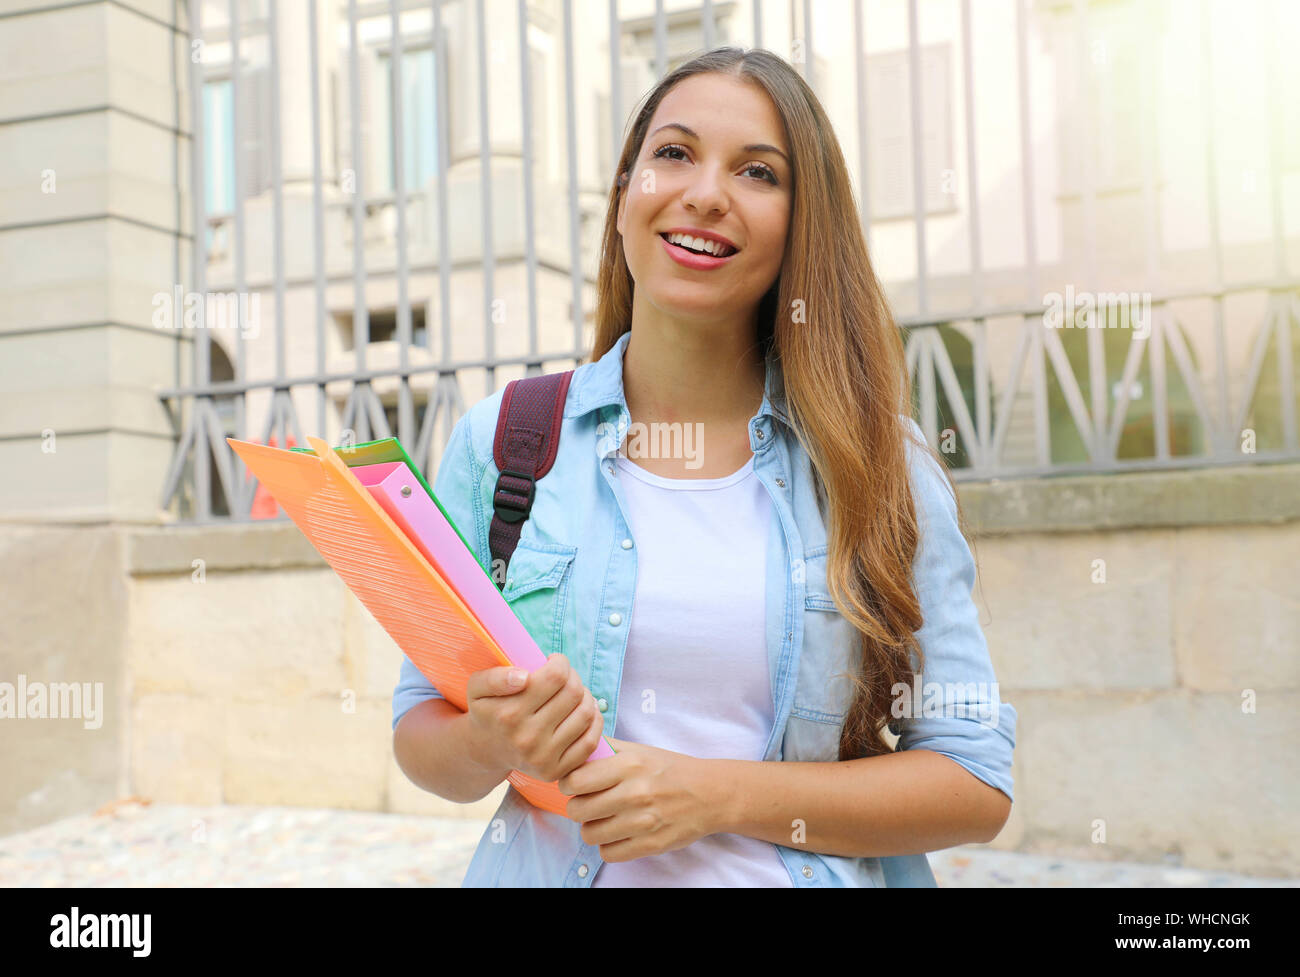 Happy student girl looking in front of her outdoors. Stock Photo